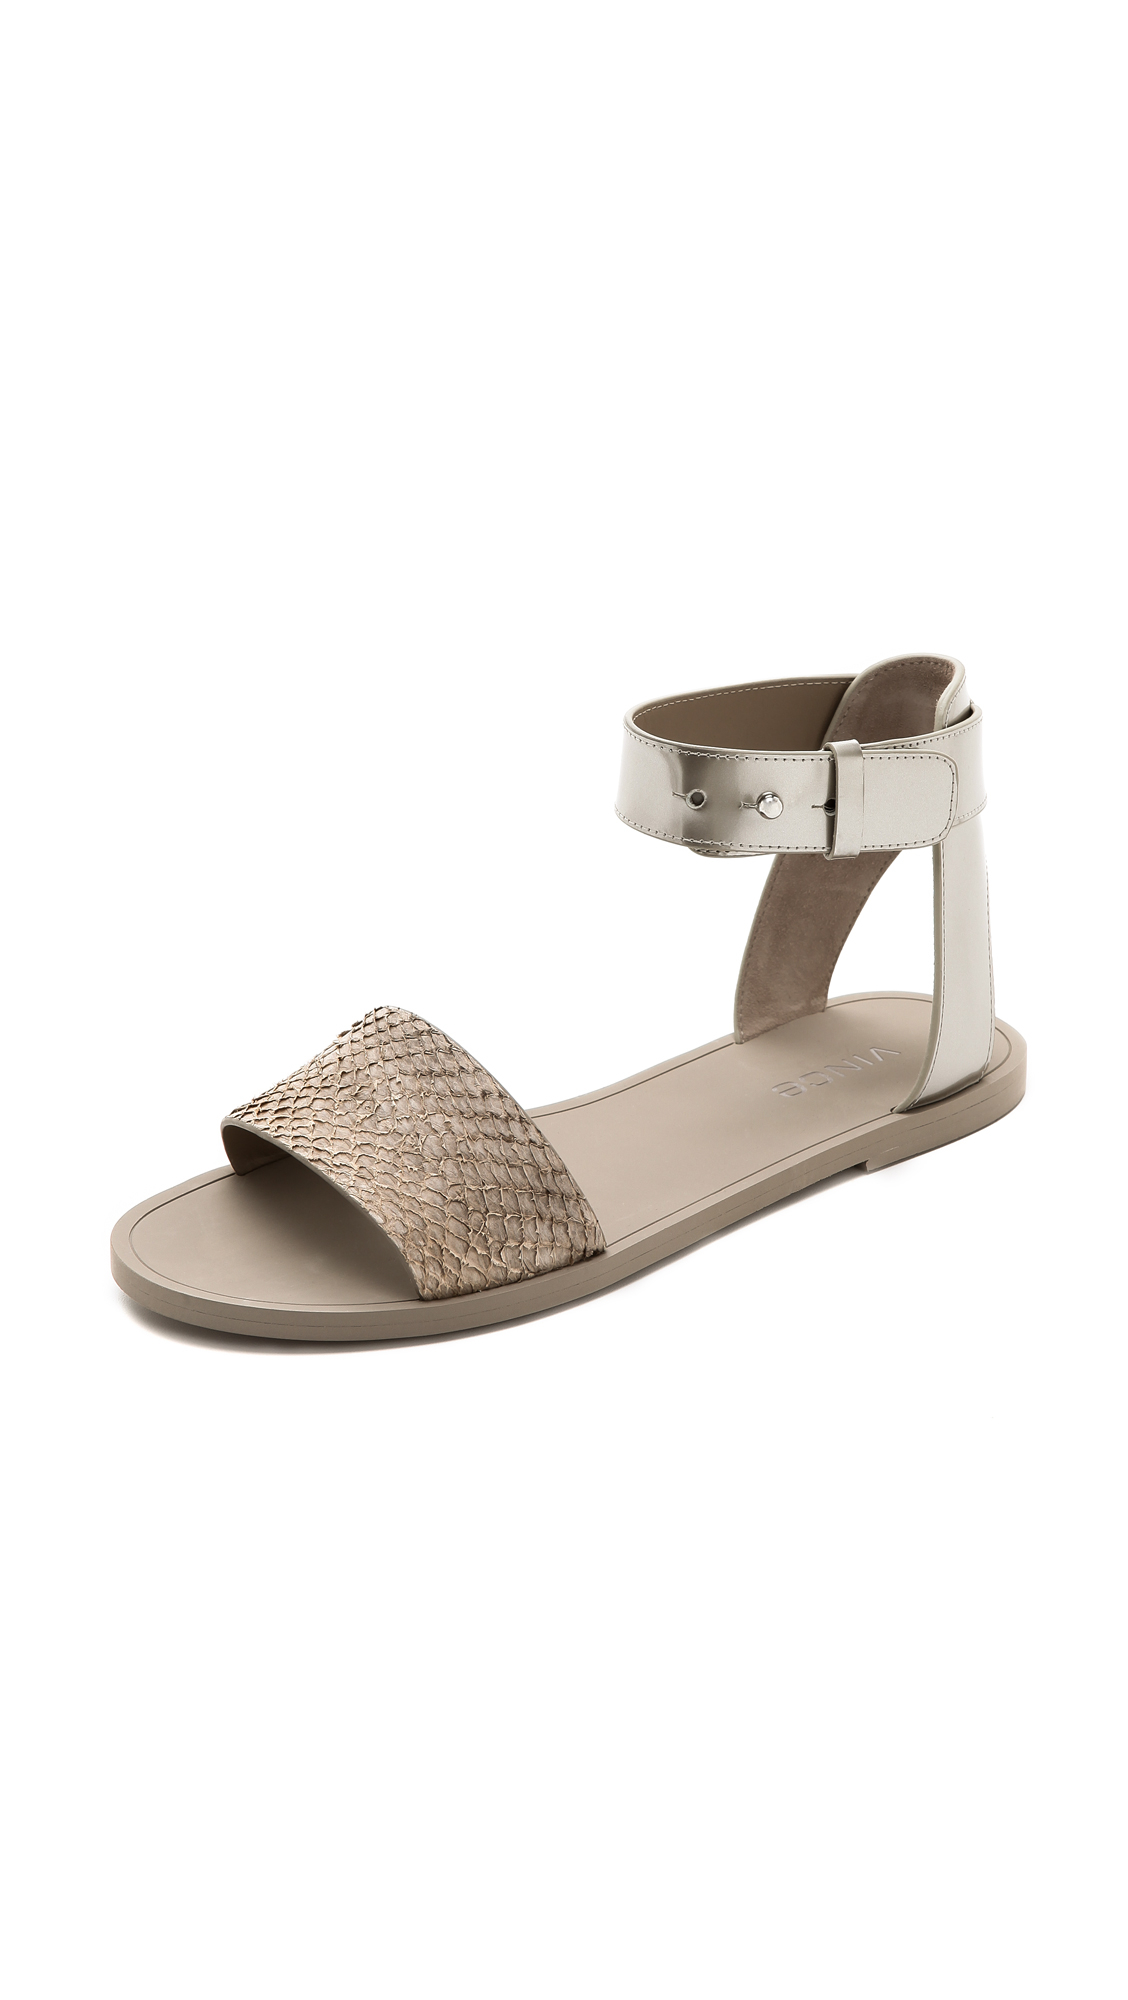 Vince Sawyer Flat Sandals with Ankle Strap in Gray - Lyst